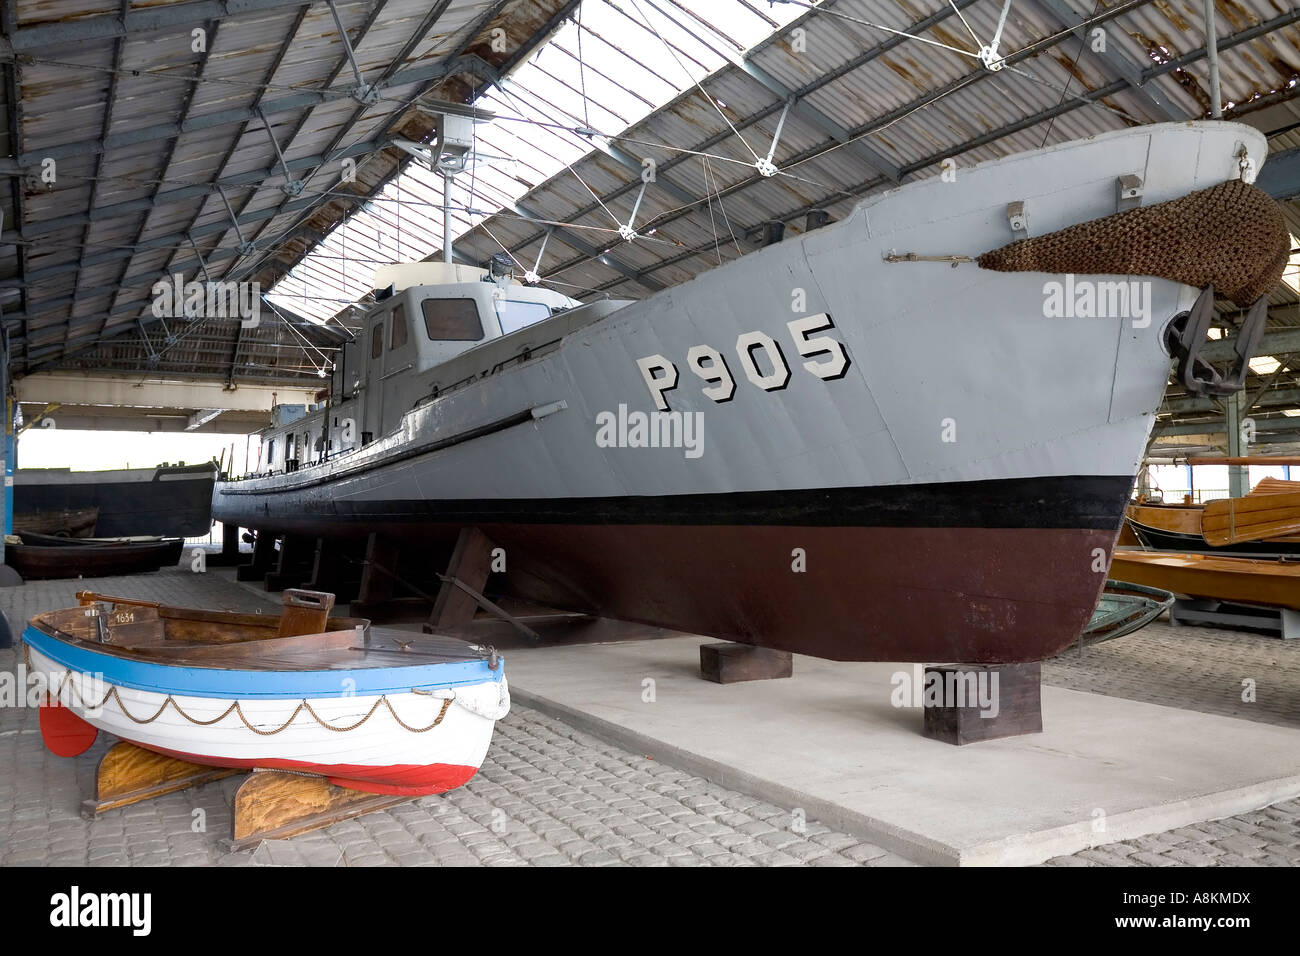 Dinghy and high sea fishing boat, exponat at national museum of shipping, hangar, bank of river Schelde, antwerp, belgium Stock Photo